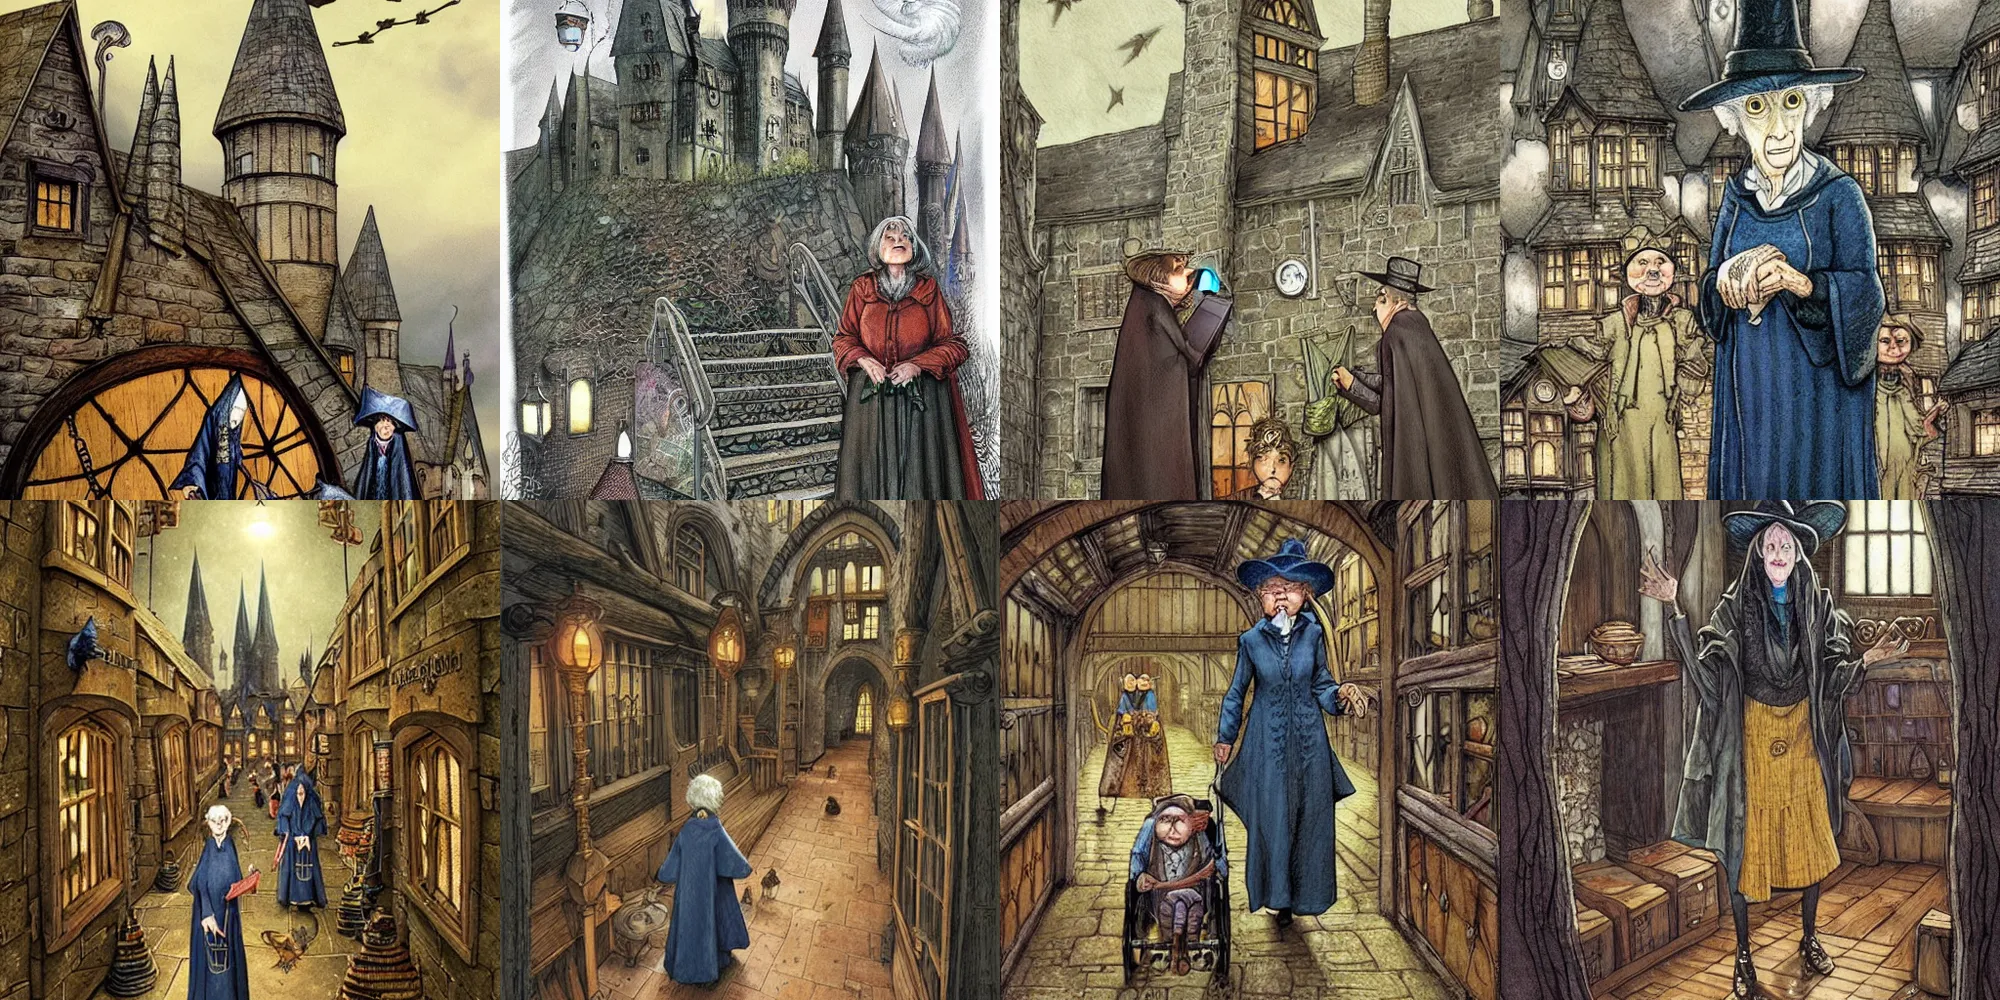 Prompt: Granny Weatherwax teachines in Hogwarts, detailed, fantasy illustration by Jim Kay and Paul Kidby